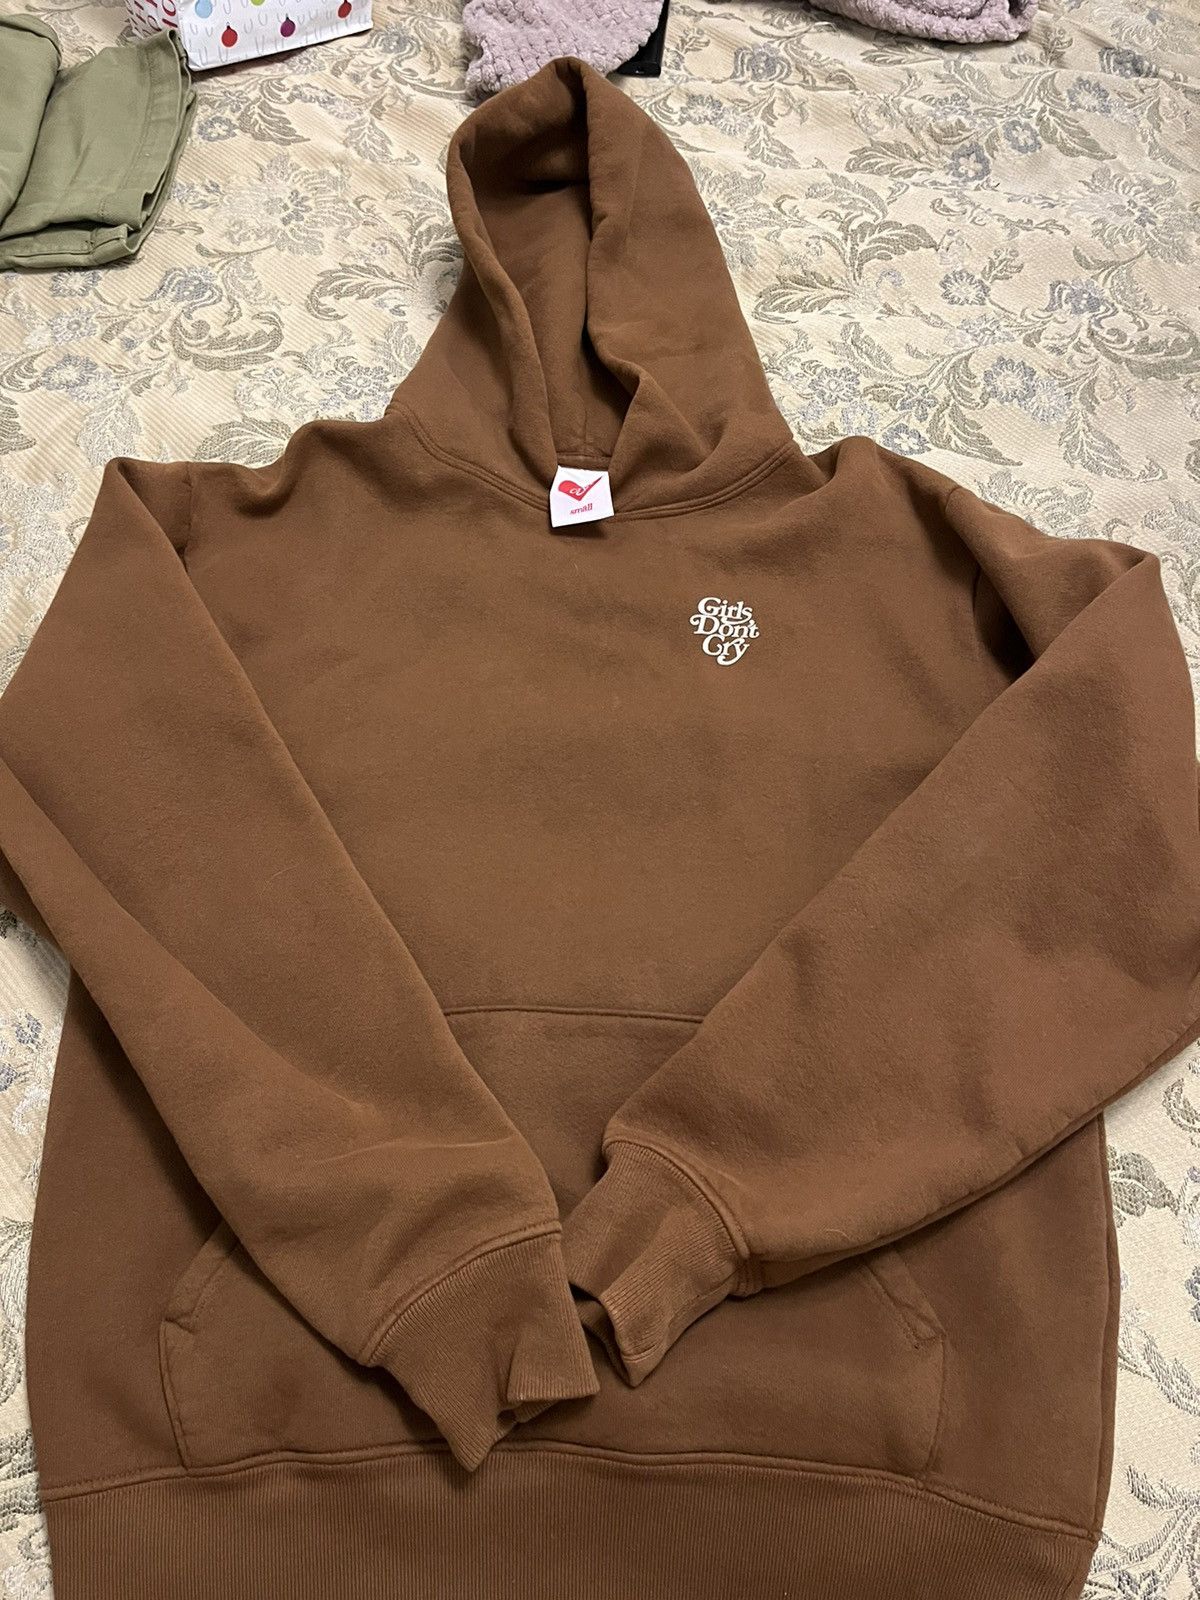 Girls Dont Cry Girls don't cry GDC logo Hoodie Brown | Grailed